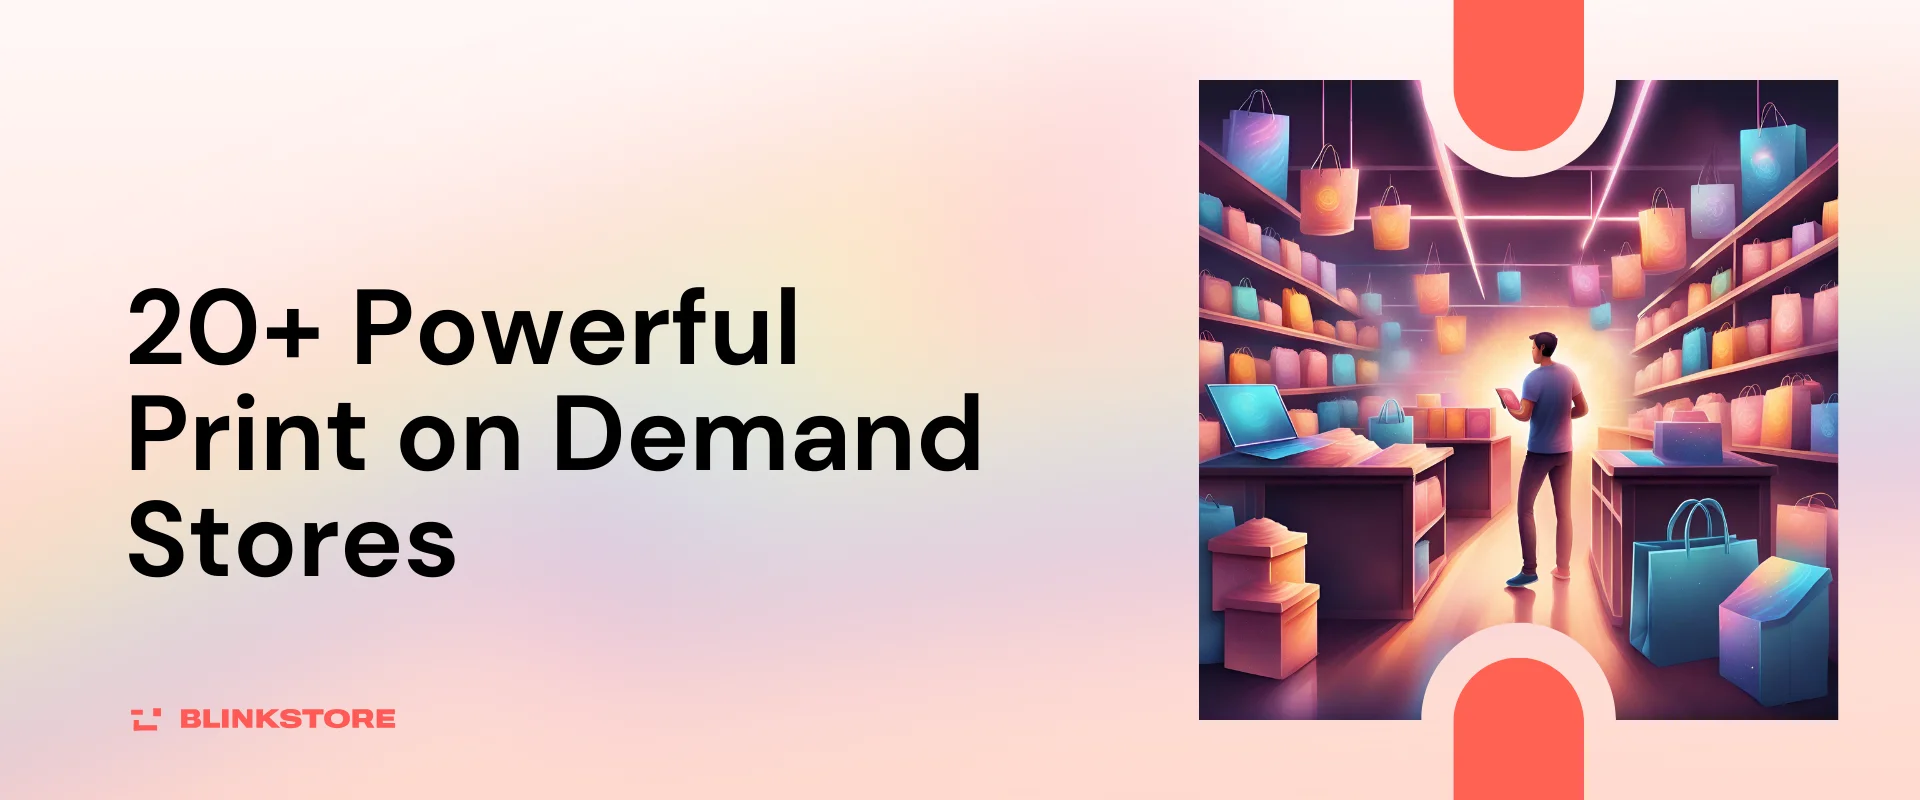 Print on Demand Stores